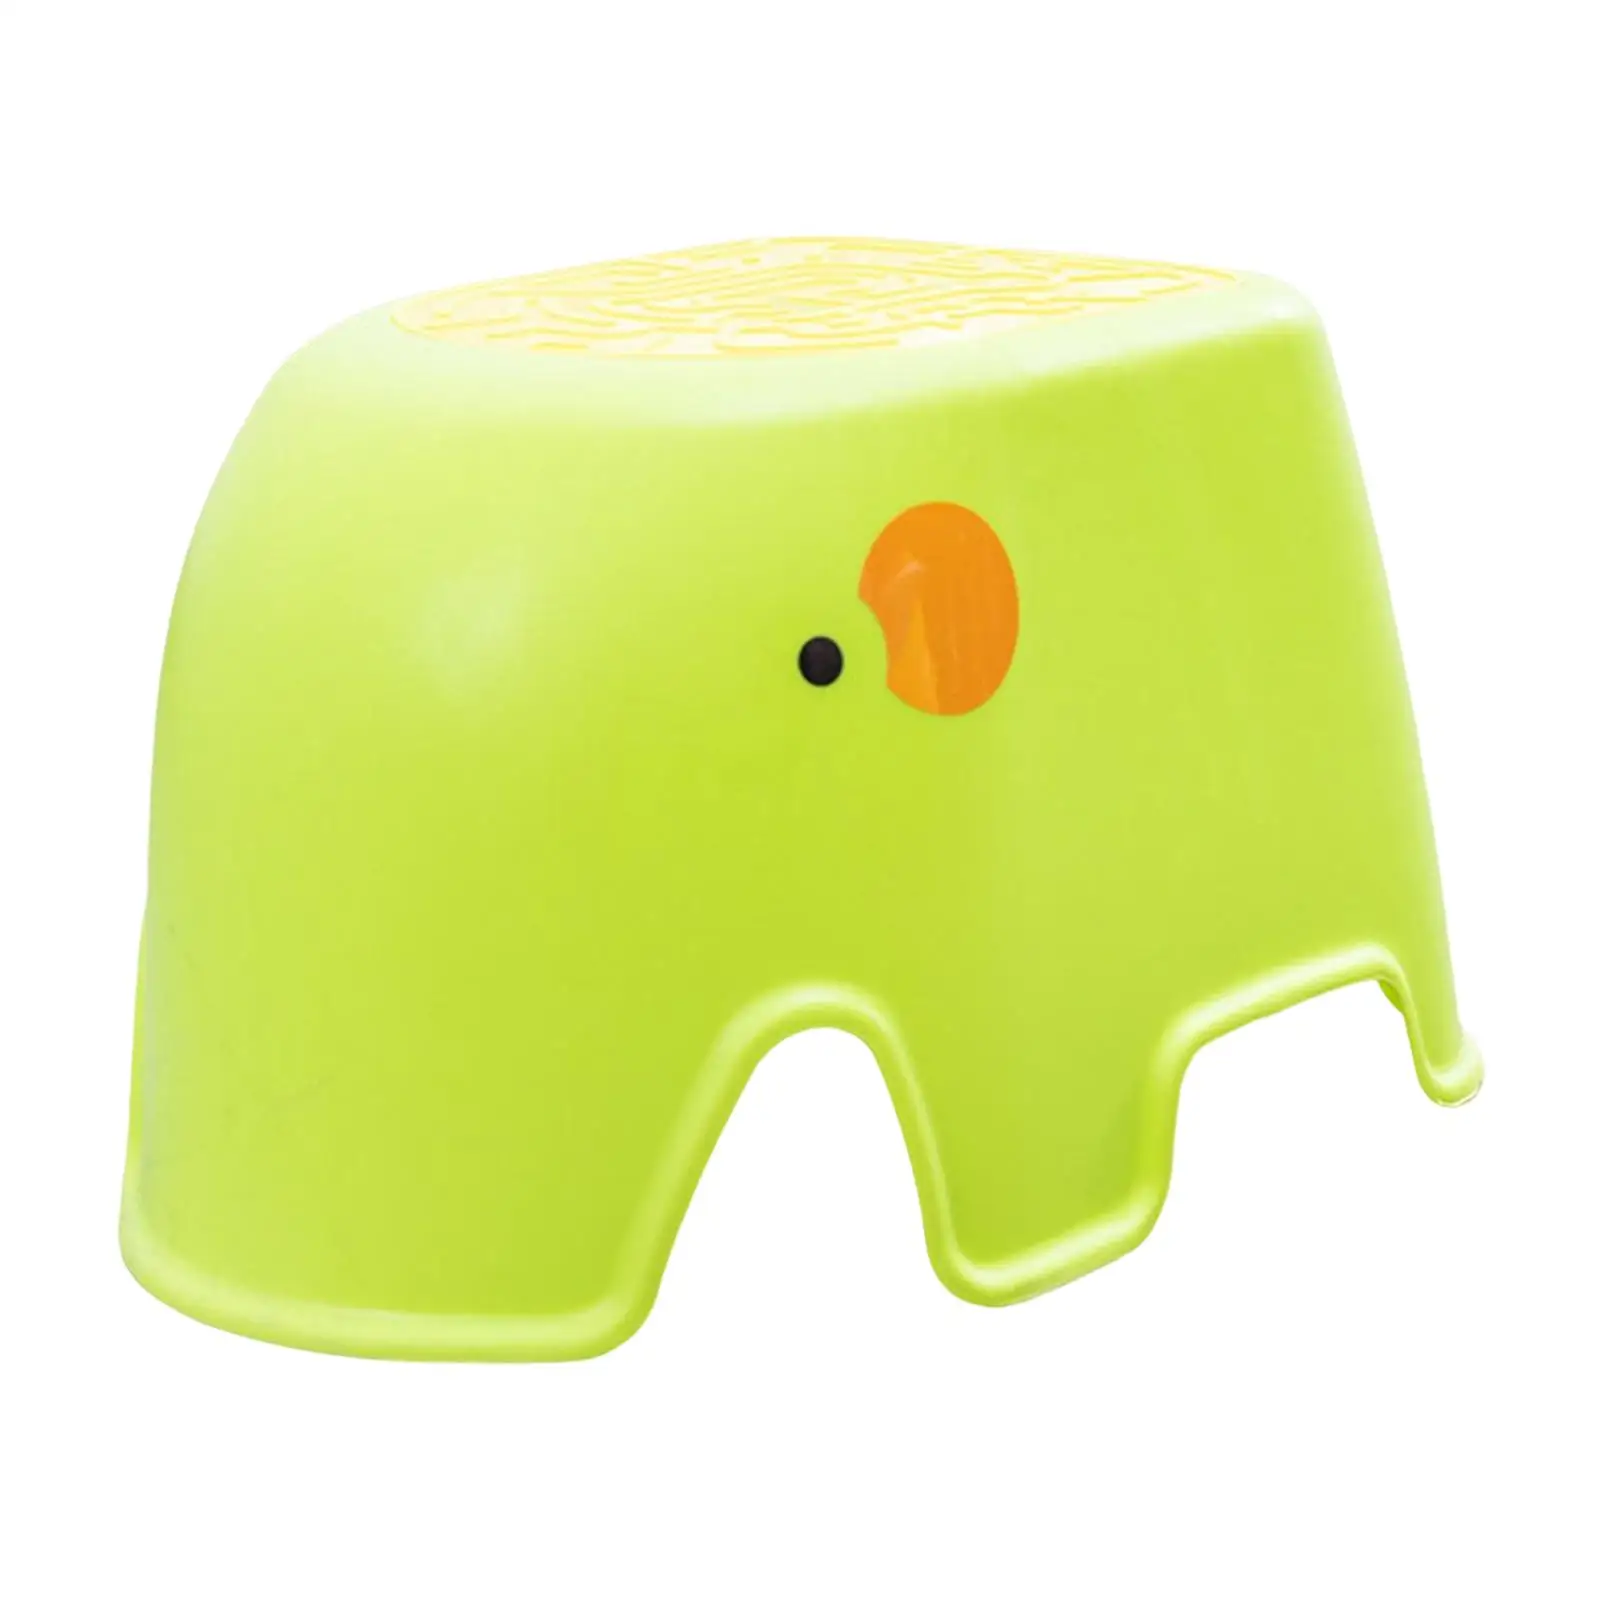 Step Stool for Kids Wide Step Sturdy Stable Poop Stools Bathroom Step Stool for Bathroom Toilet Potty Training Kitchen Bedroom